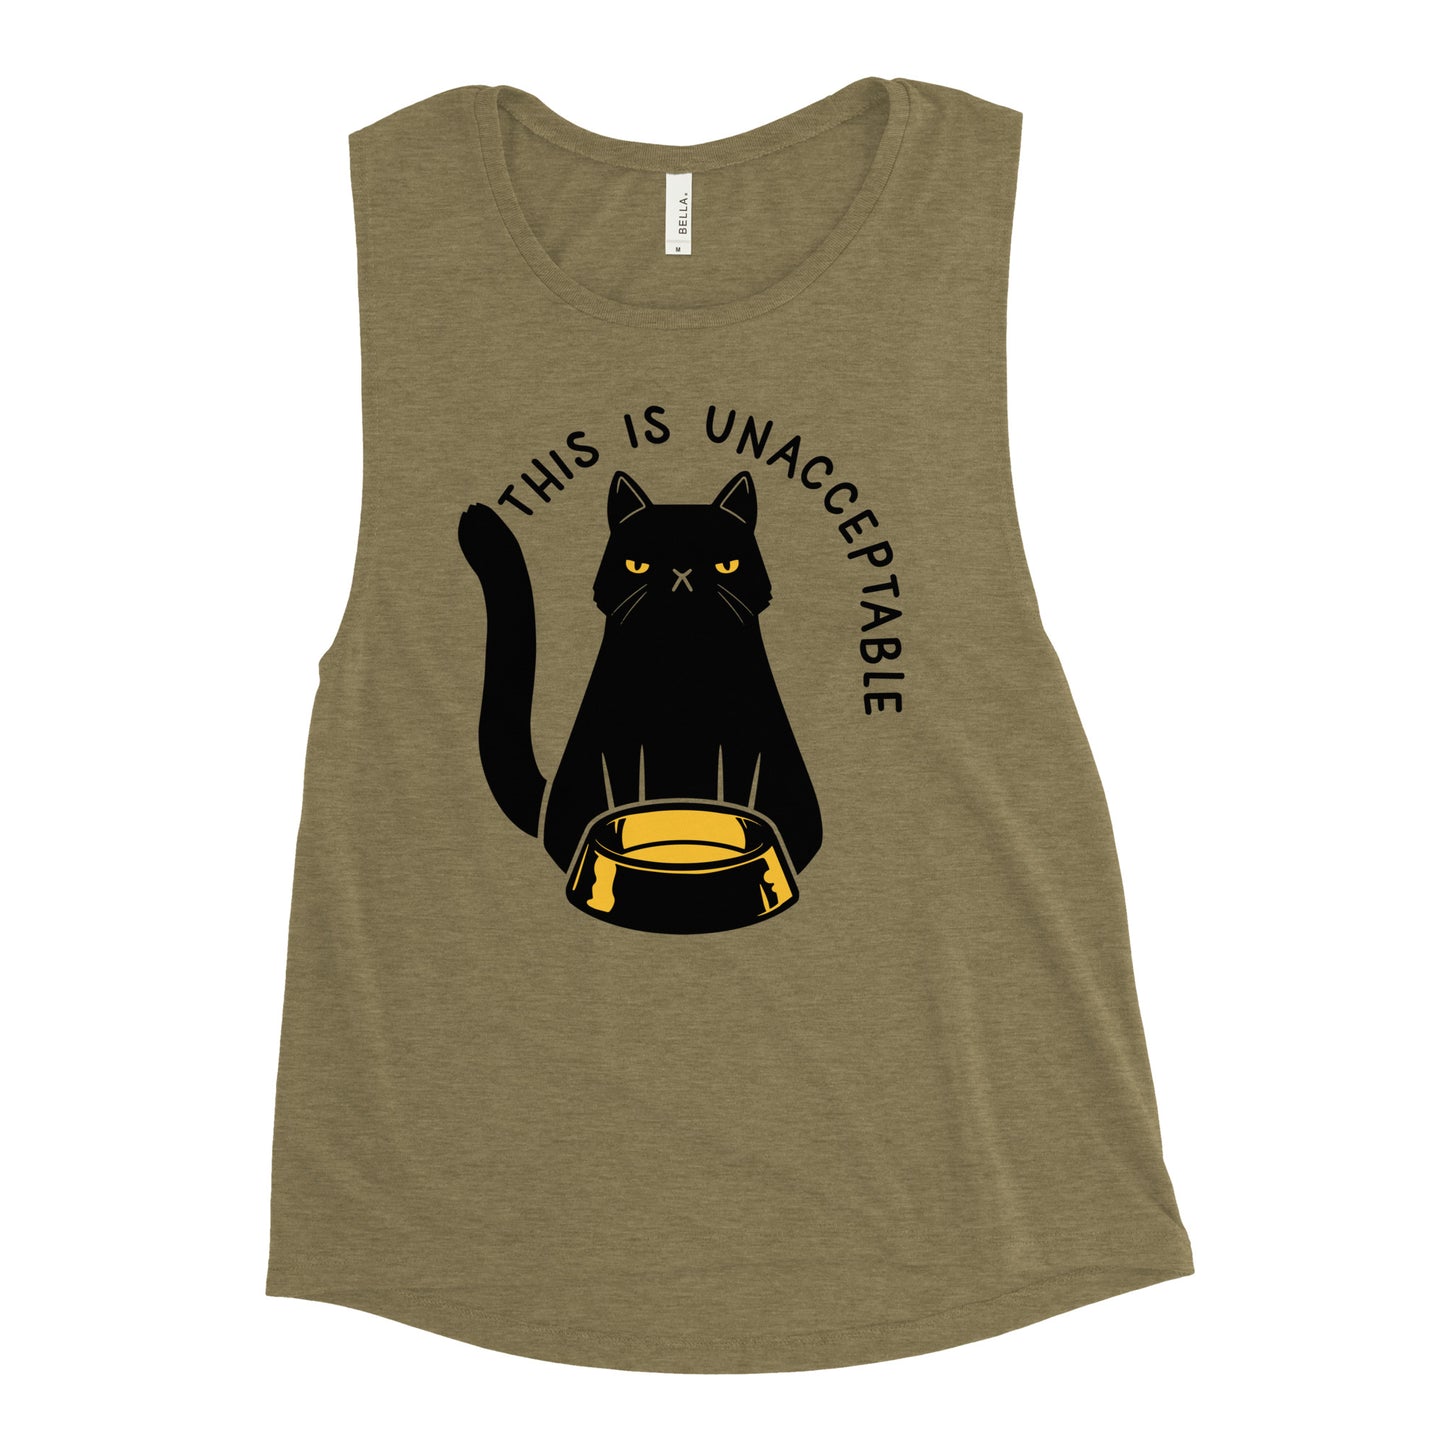 This Is Unacceptable Women's Muscle Tank